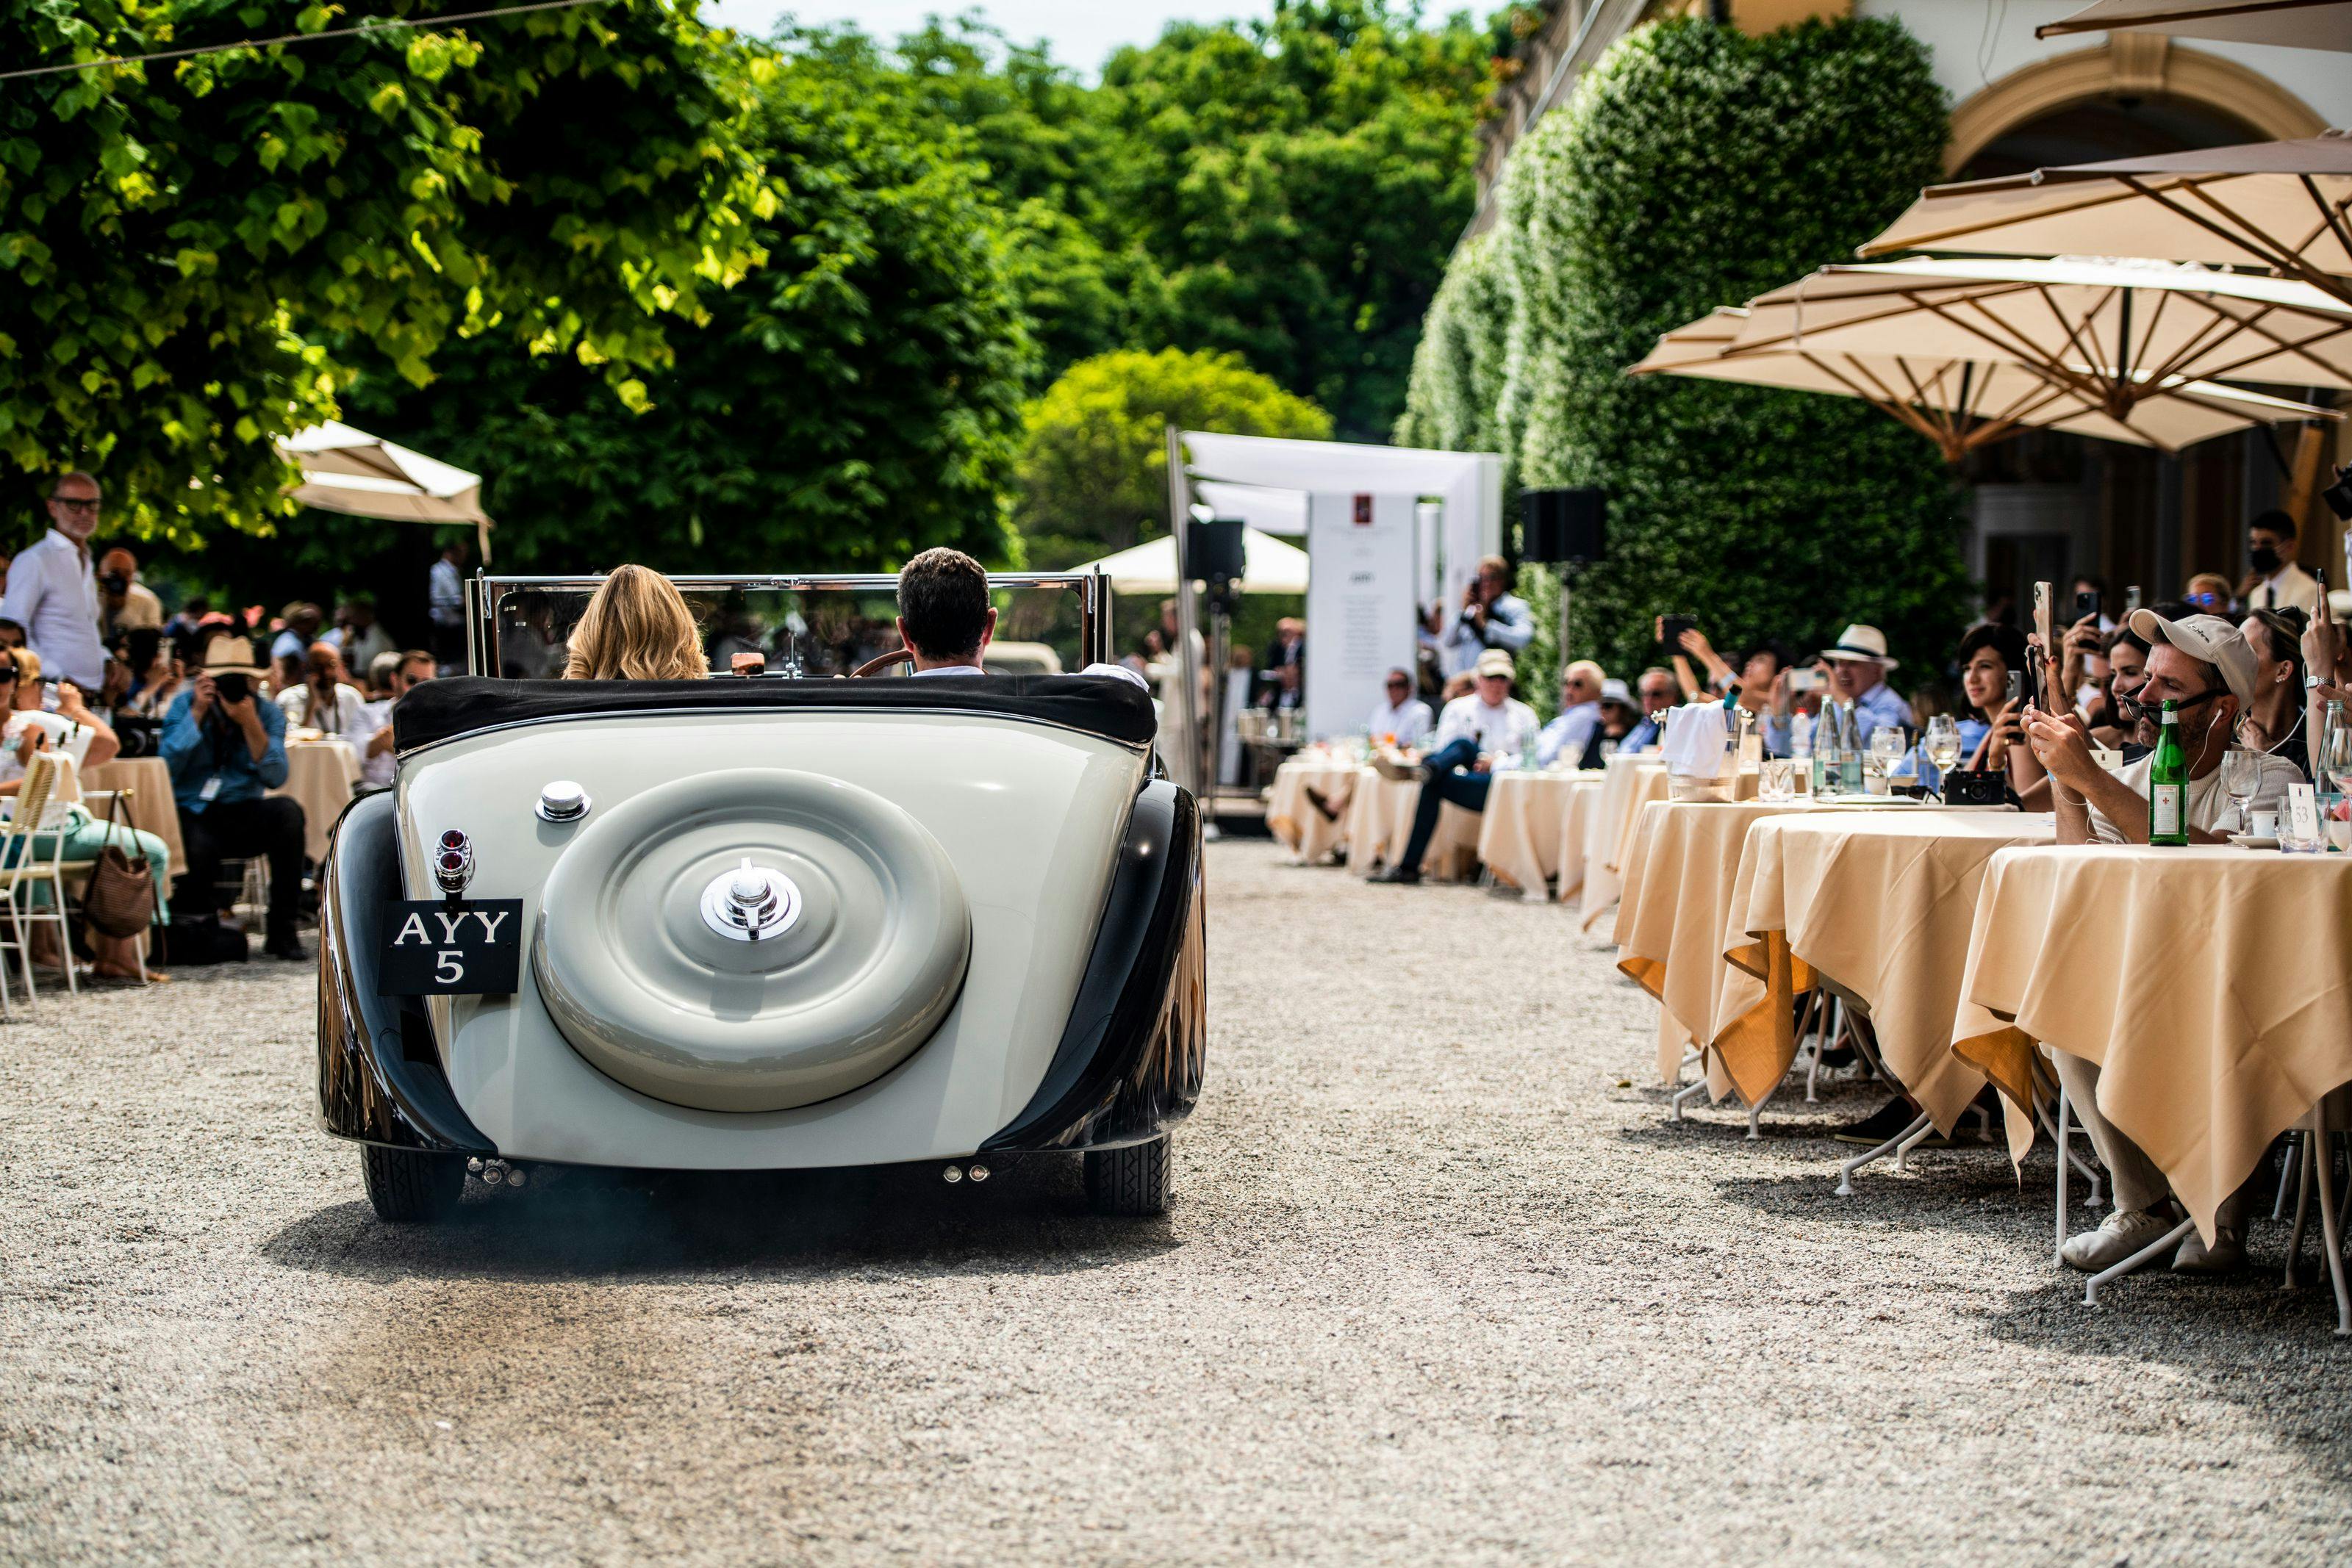 Bugatti wins several times at Concorso d’Eleganza with the ‘Best of Show’ award, the ‘Fiva Trophy’and the ‘Design award’